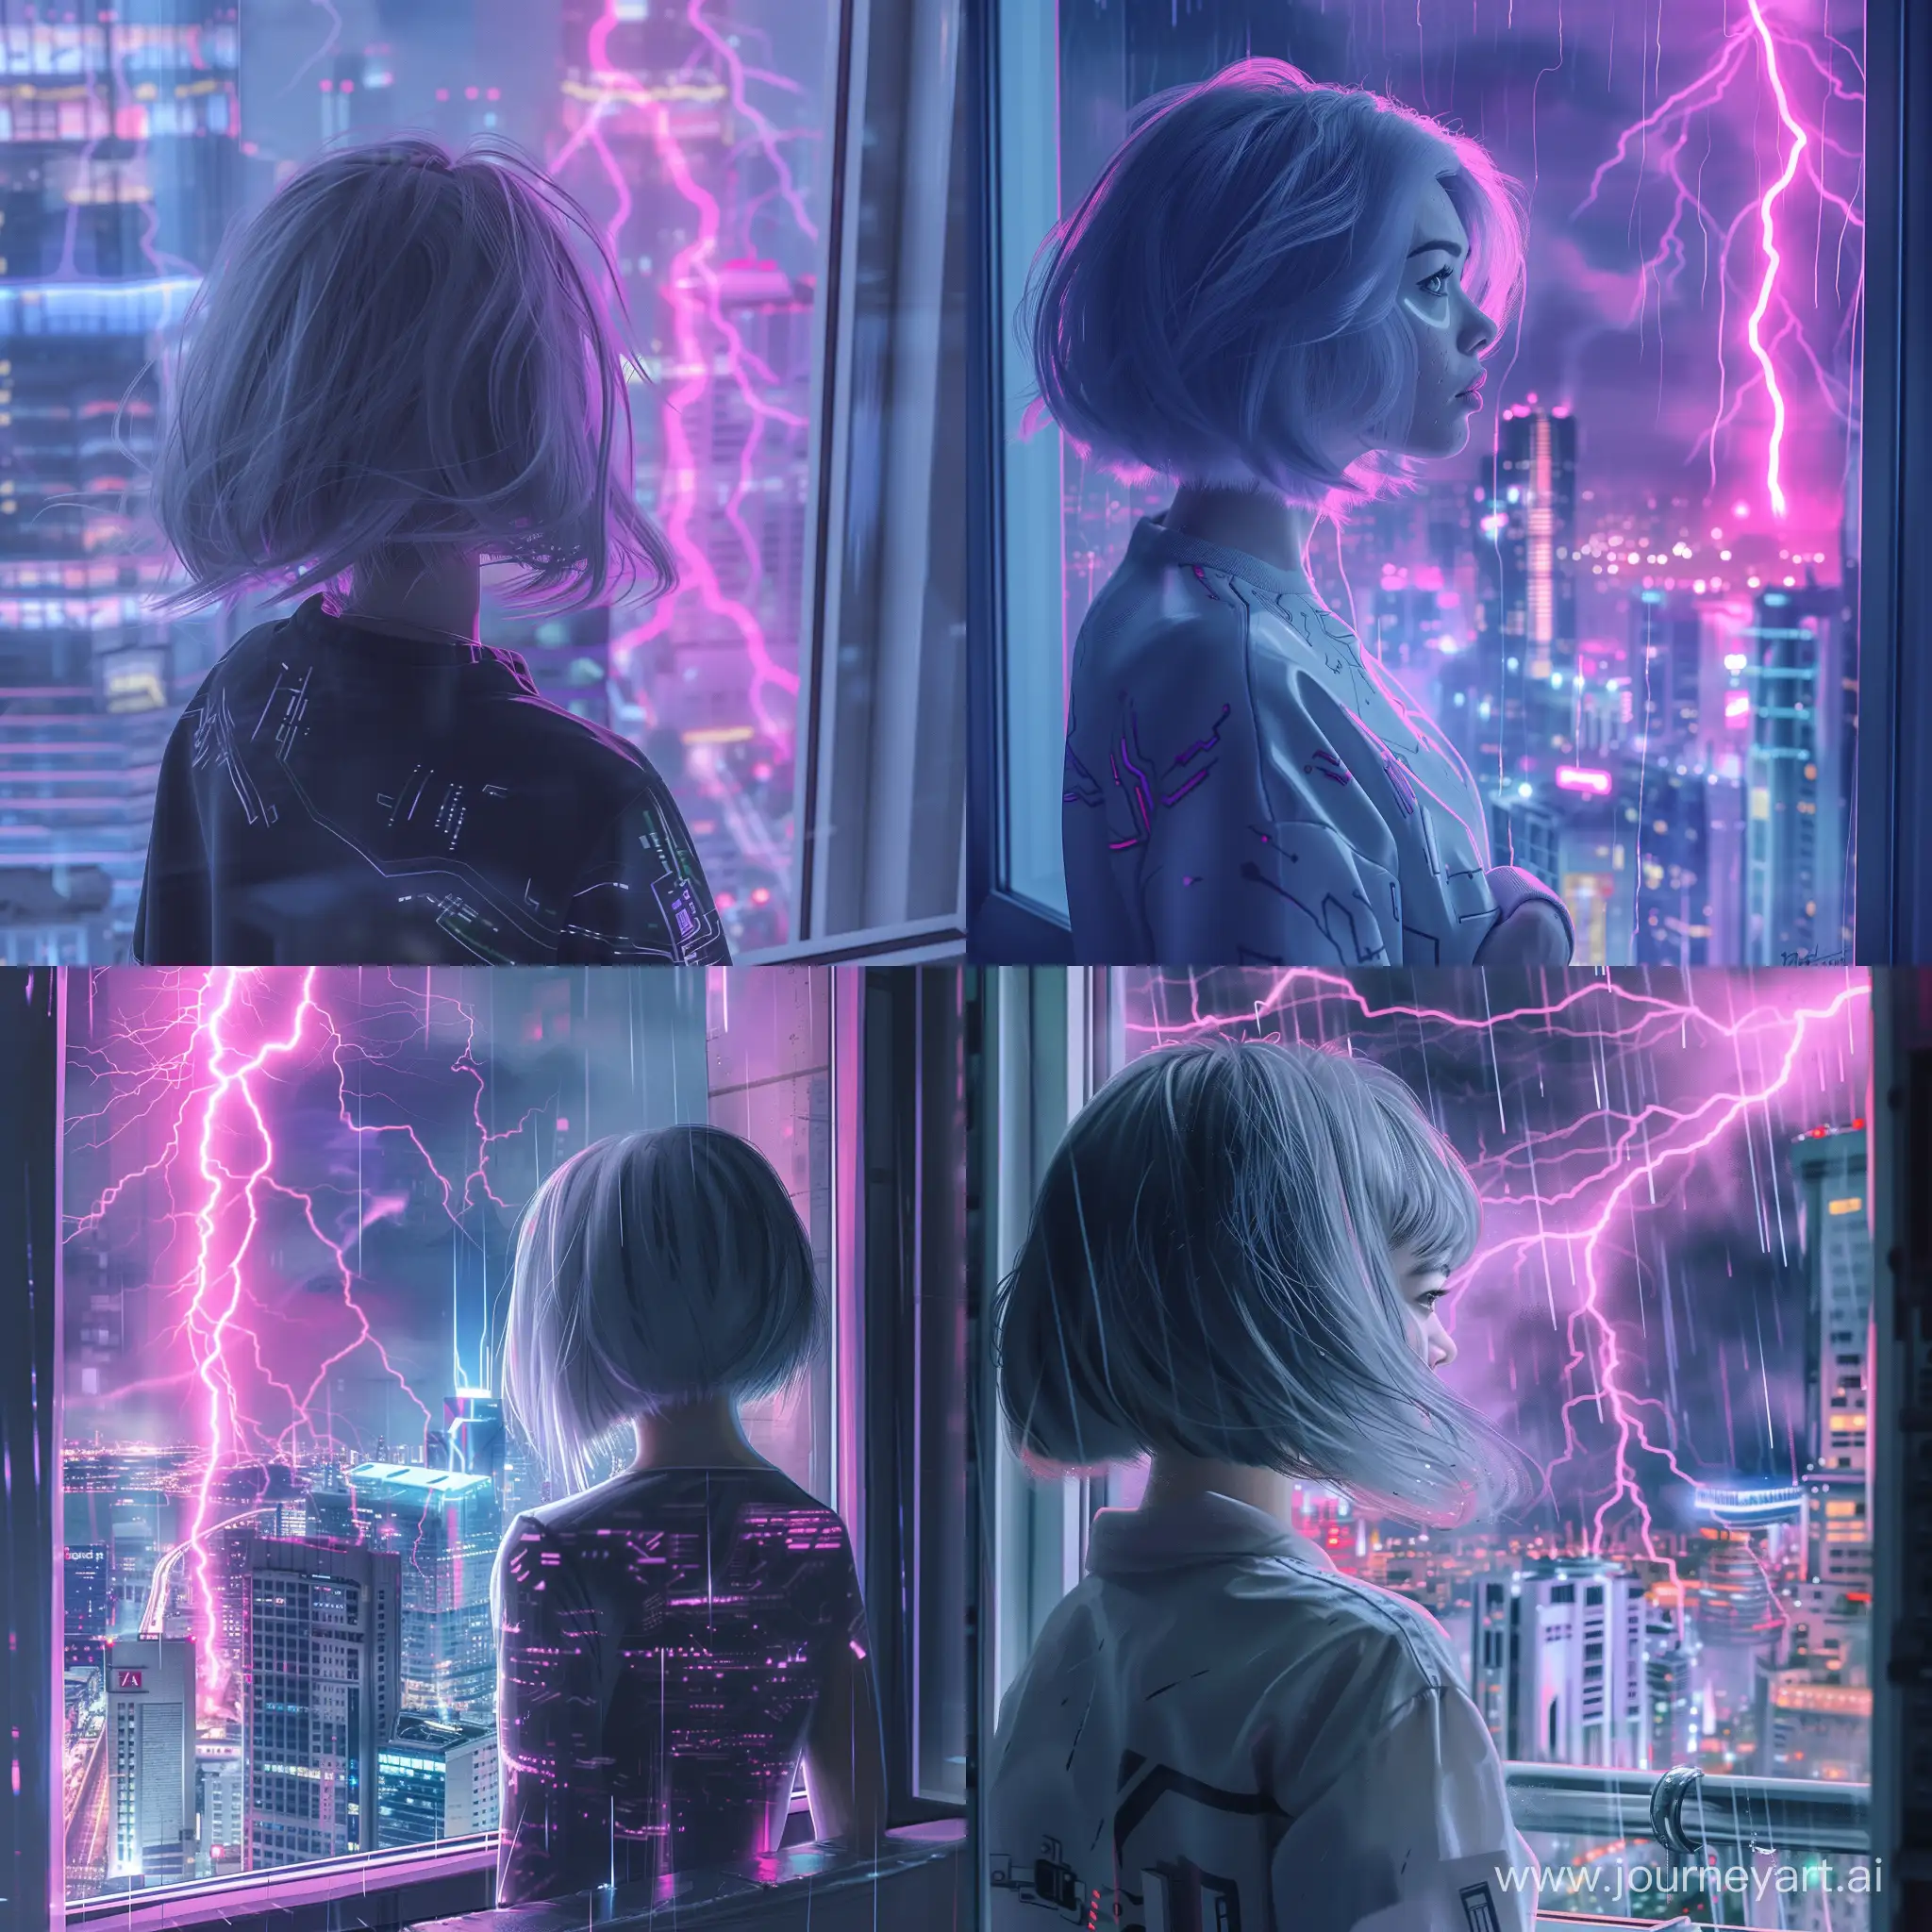 Nice girl with gray hair color and short hairstyle looking to cyberpunk city from window, the city lightning is pink or purple or blue, realistic art